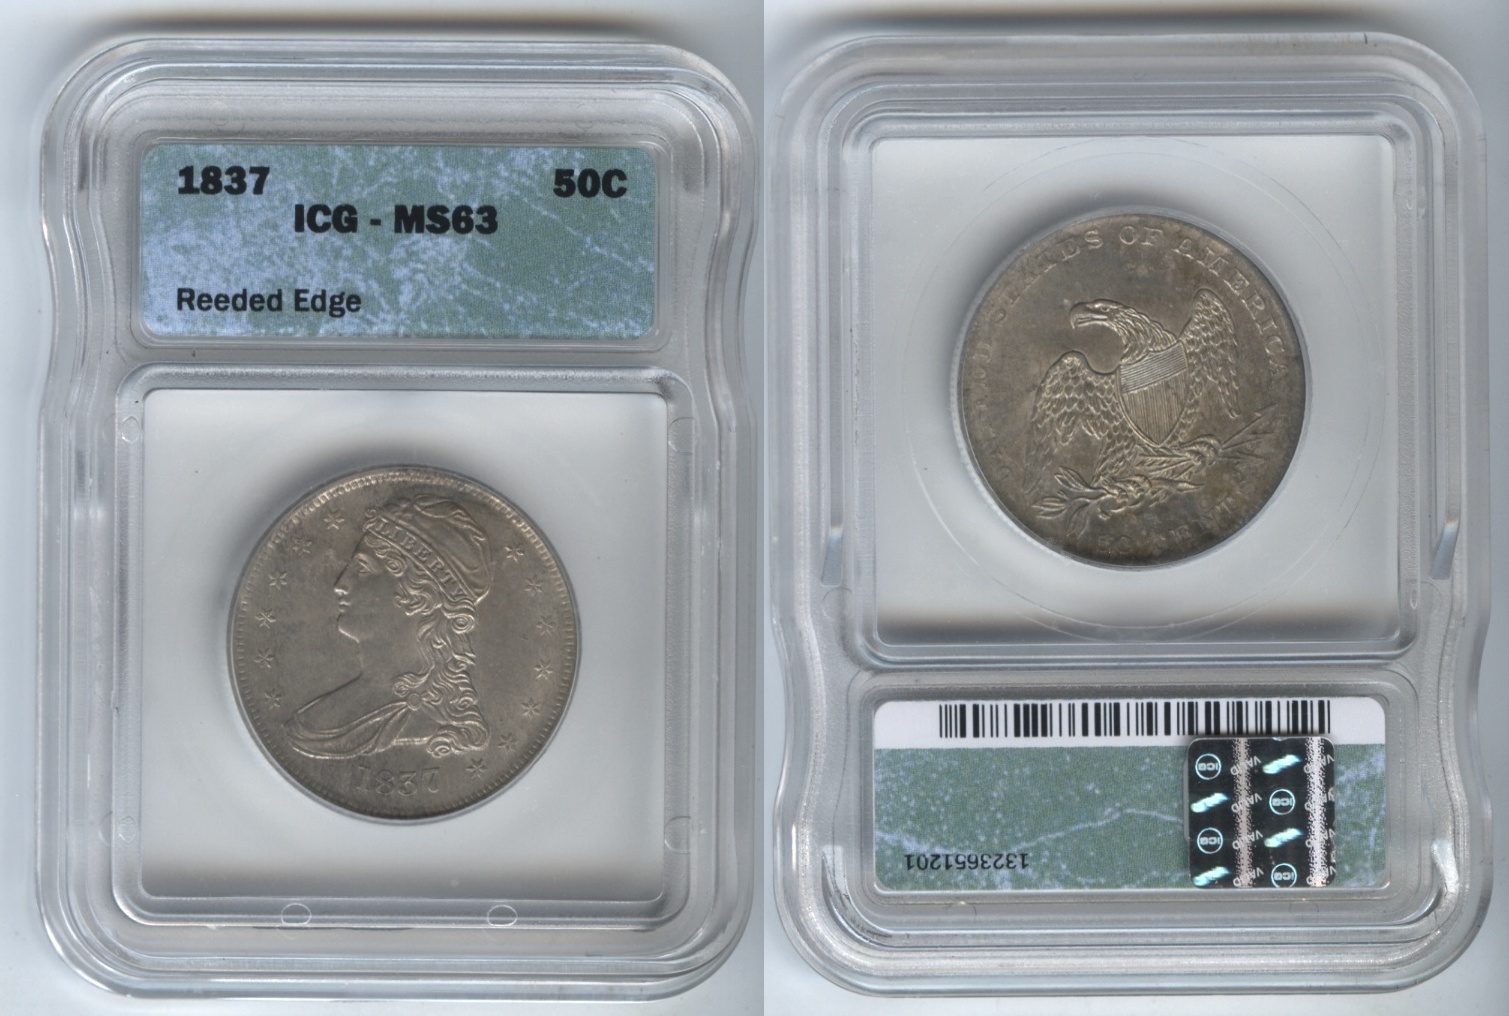 1837 Reeded Edge Capped Bust Half Dollar ICG MS-63